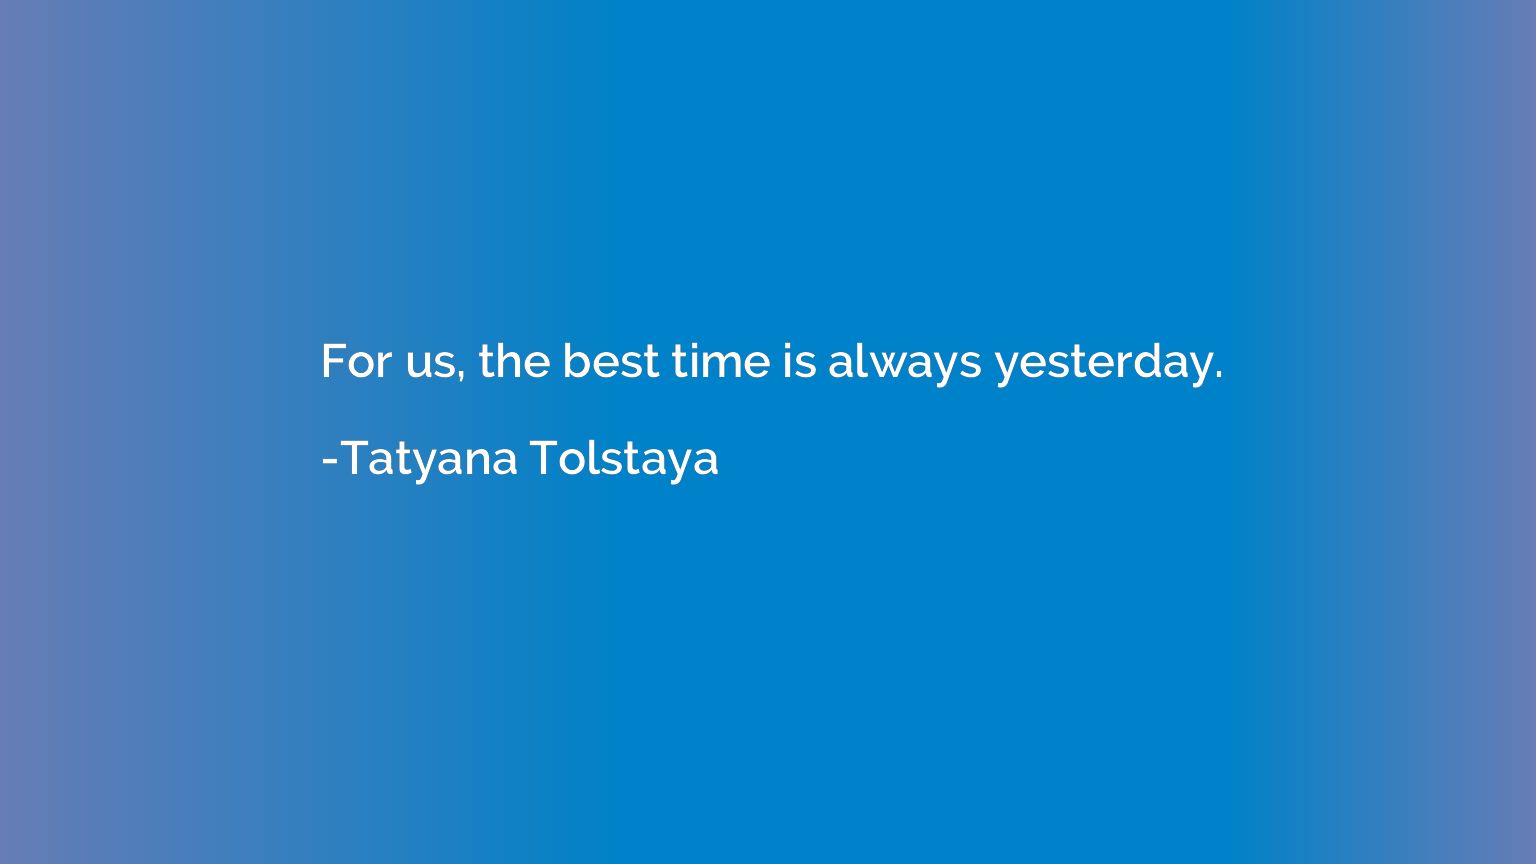 For us, the best time is always yesterday.